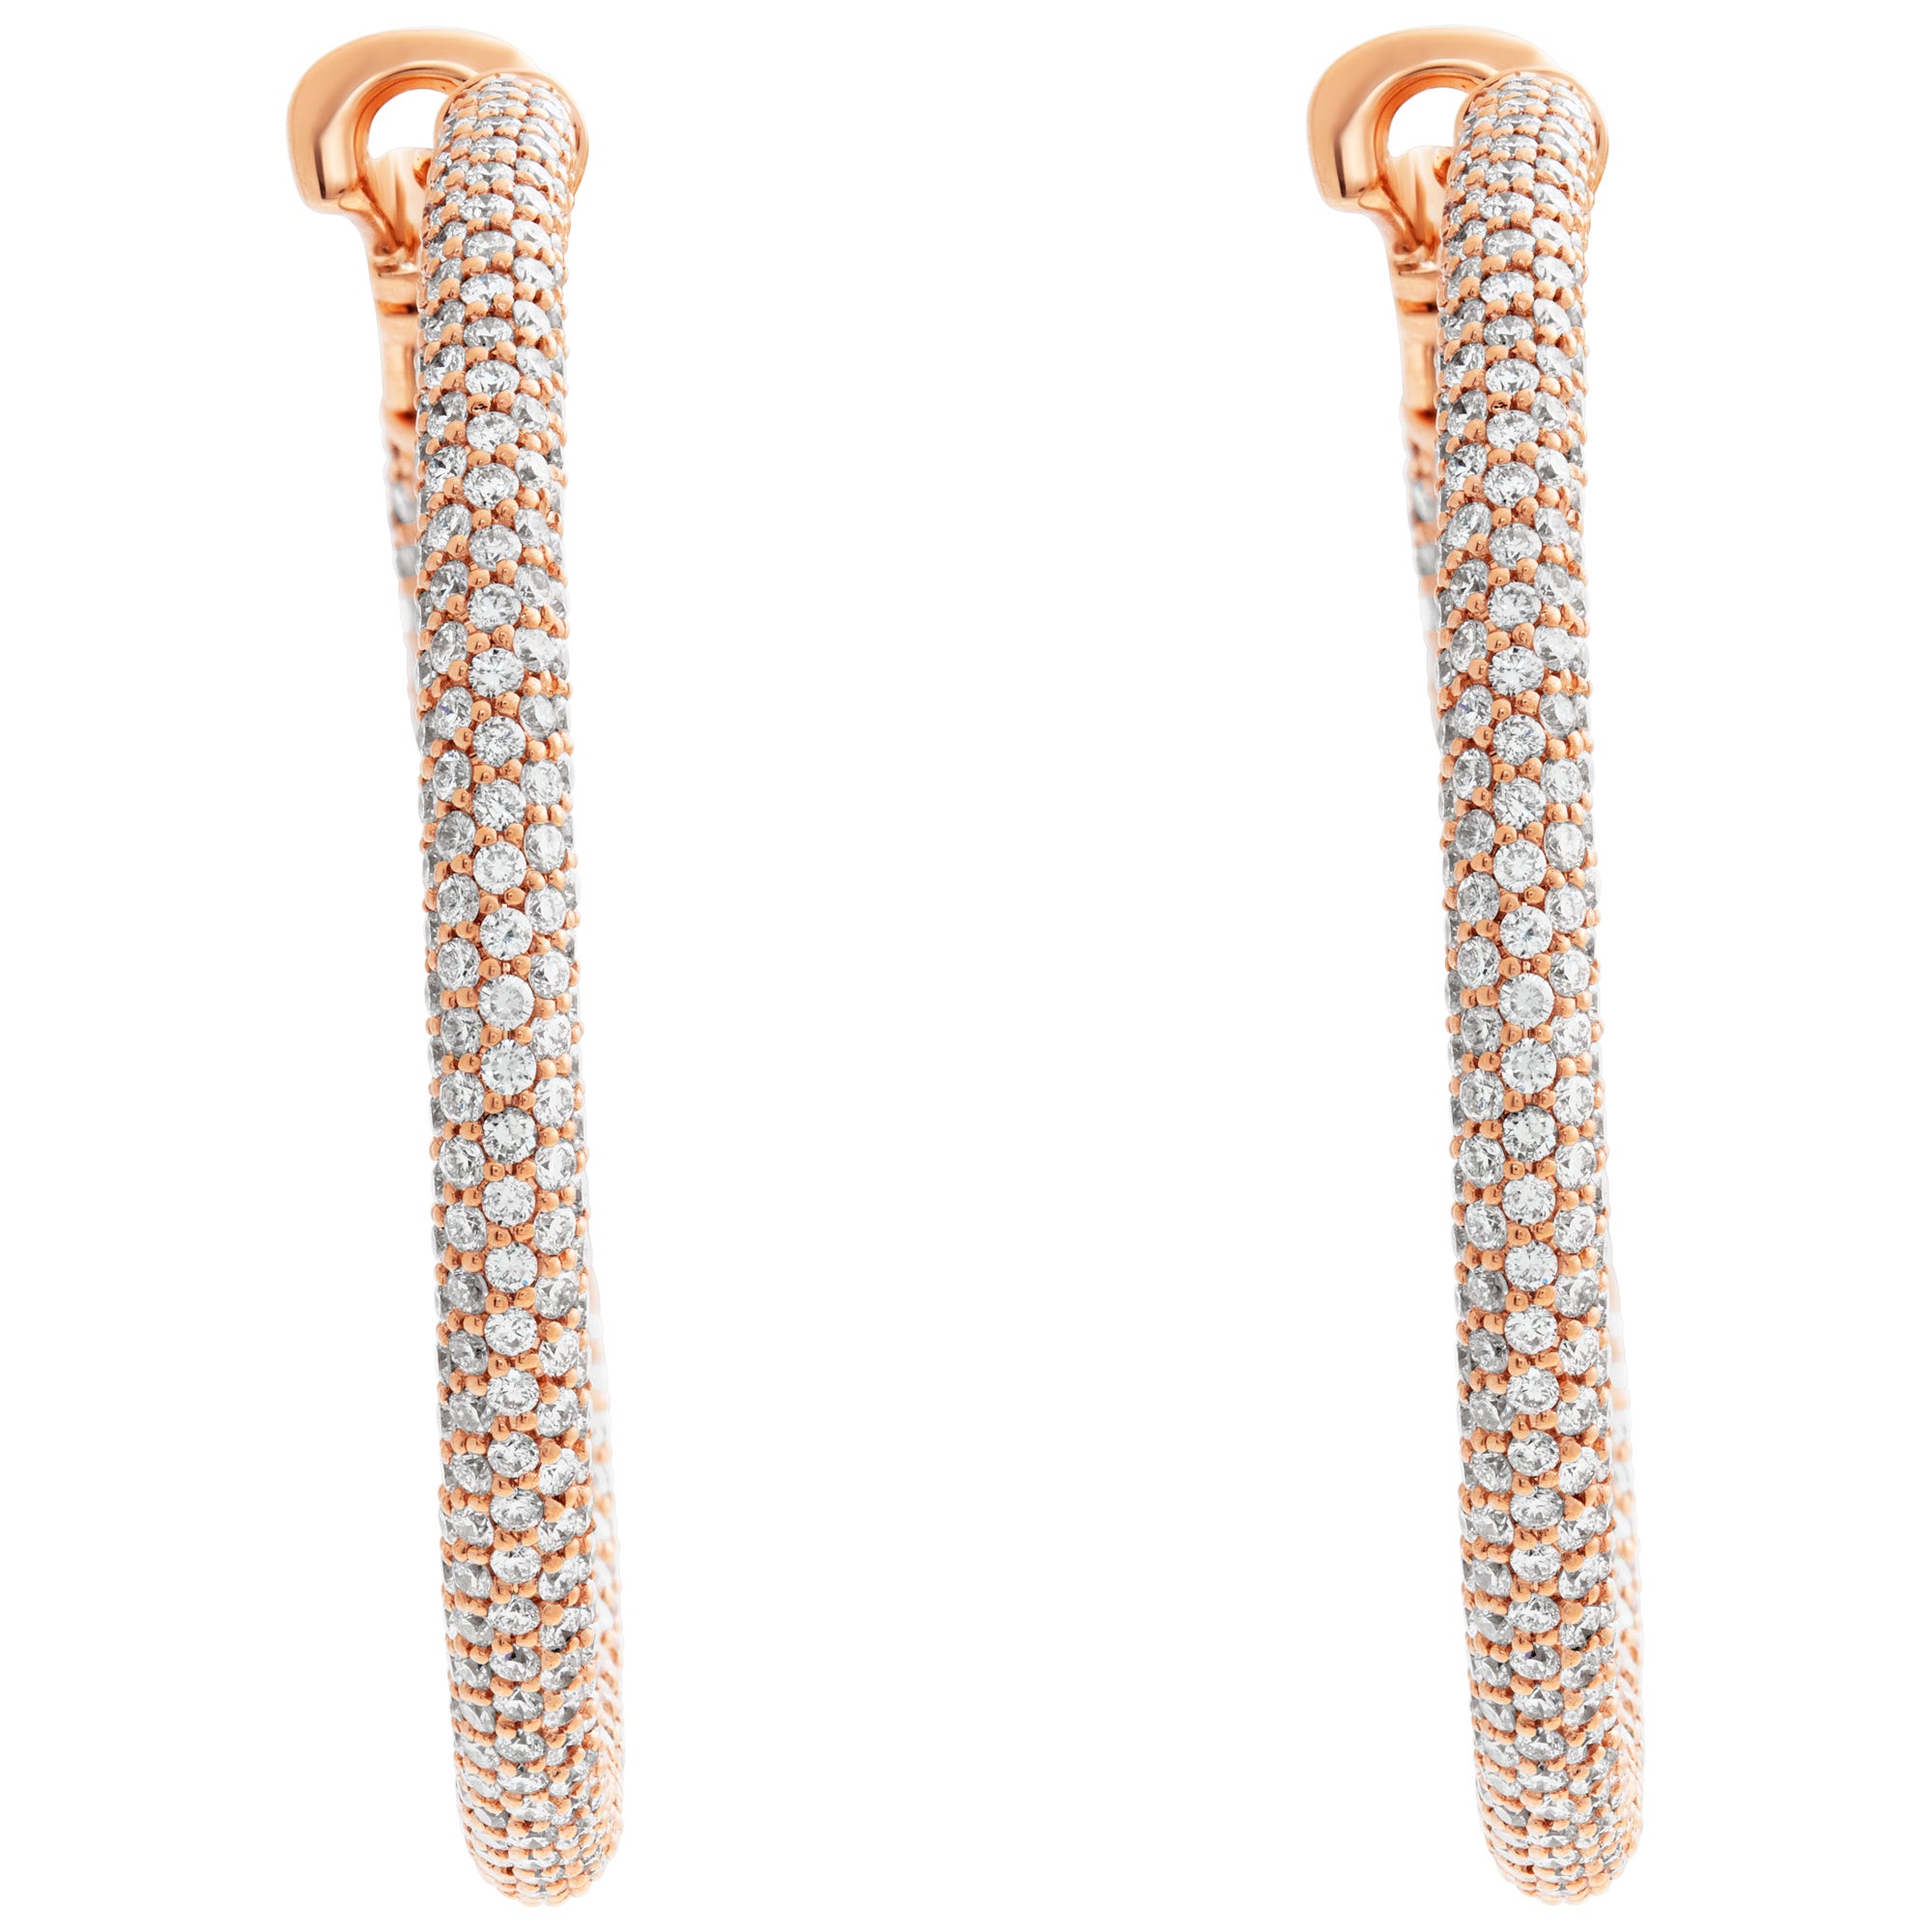 18k Rose Gold Pave Hoop Earrings with 6.90 Carats in Round Brilliant Cut Diamond